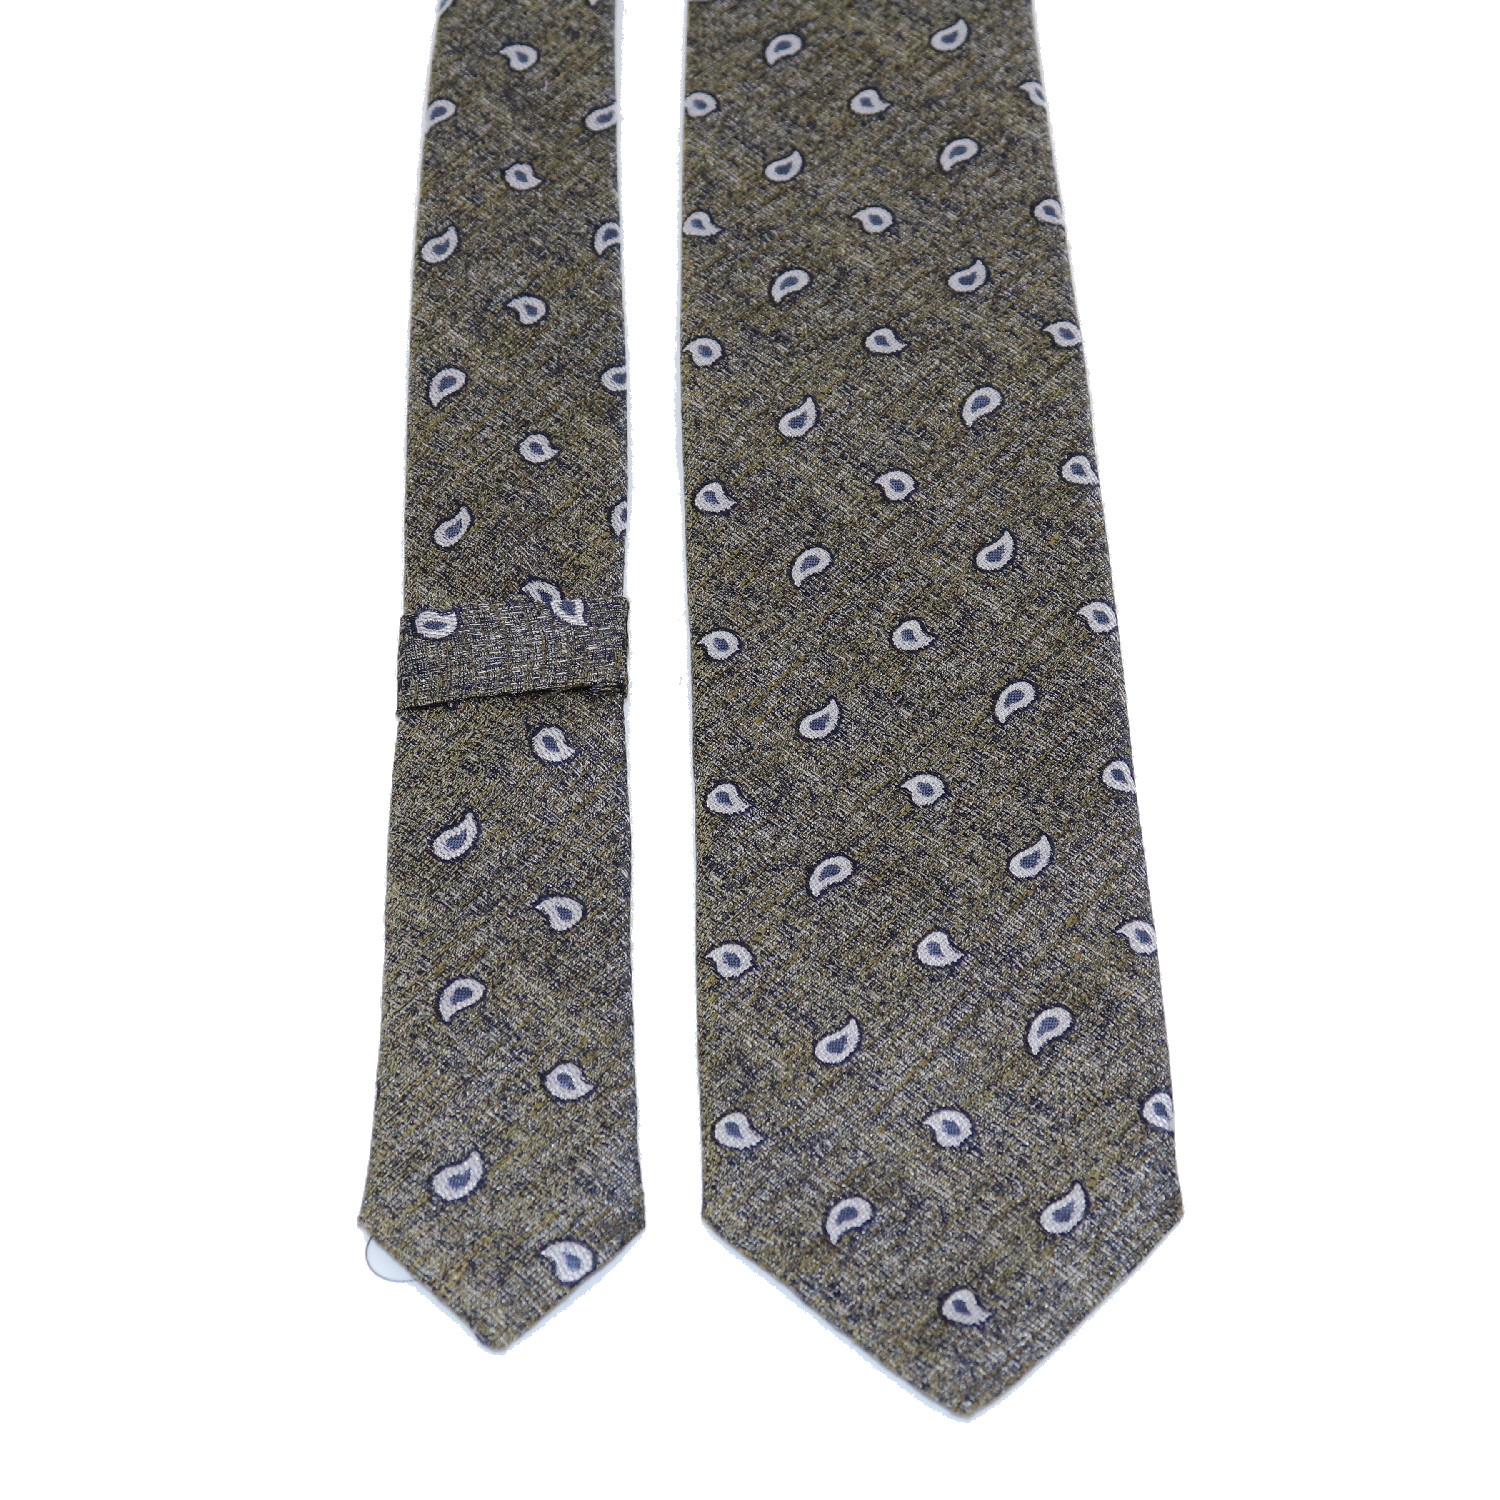 Formal business tie, silk and linen blend, small paisley pattern on ...